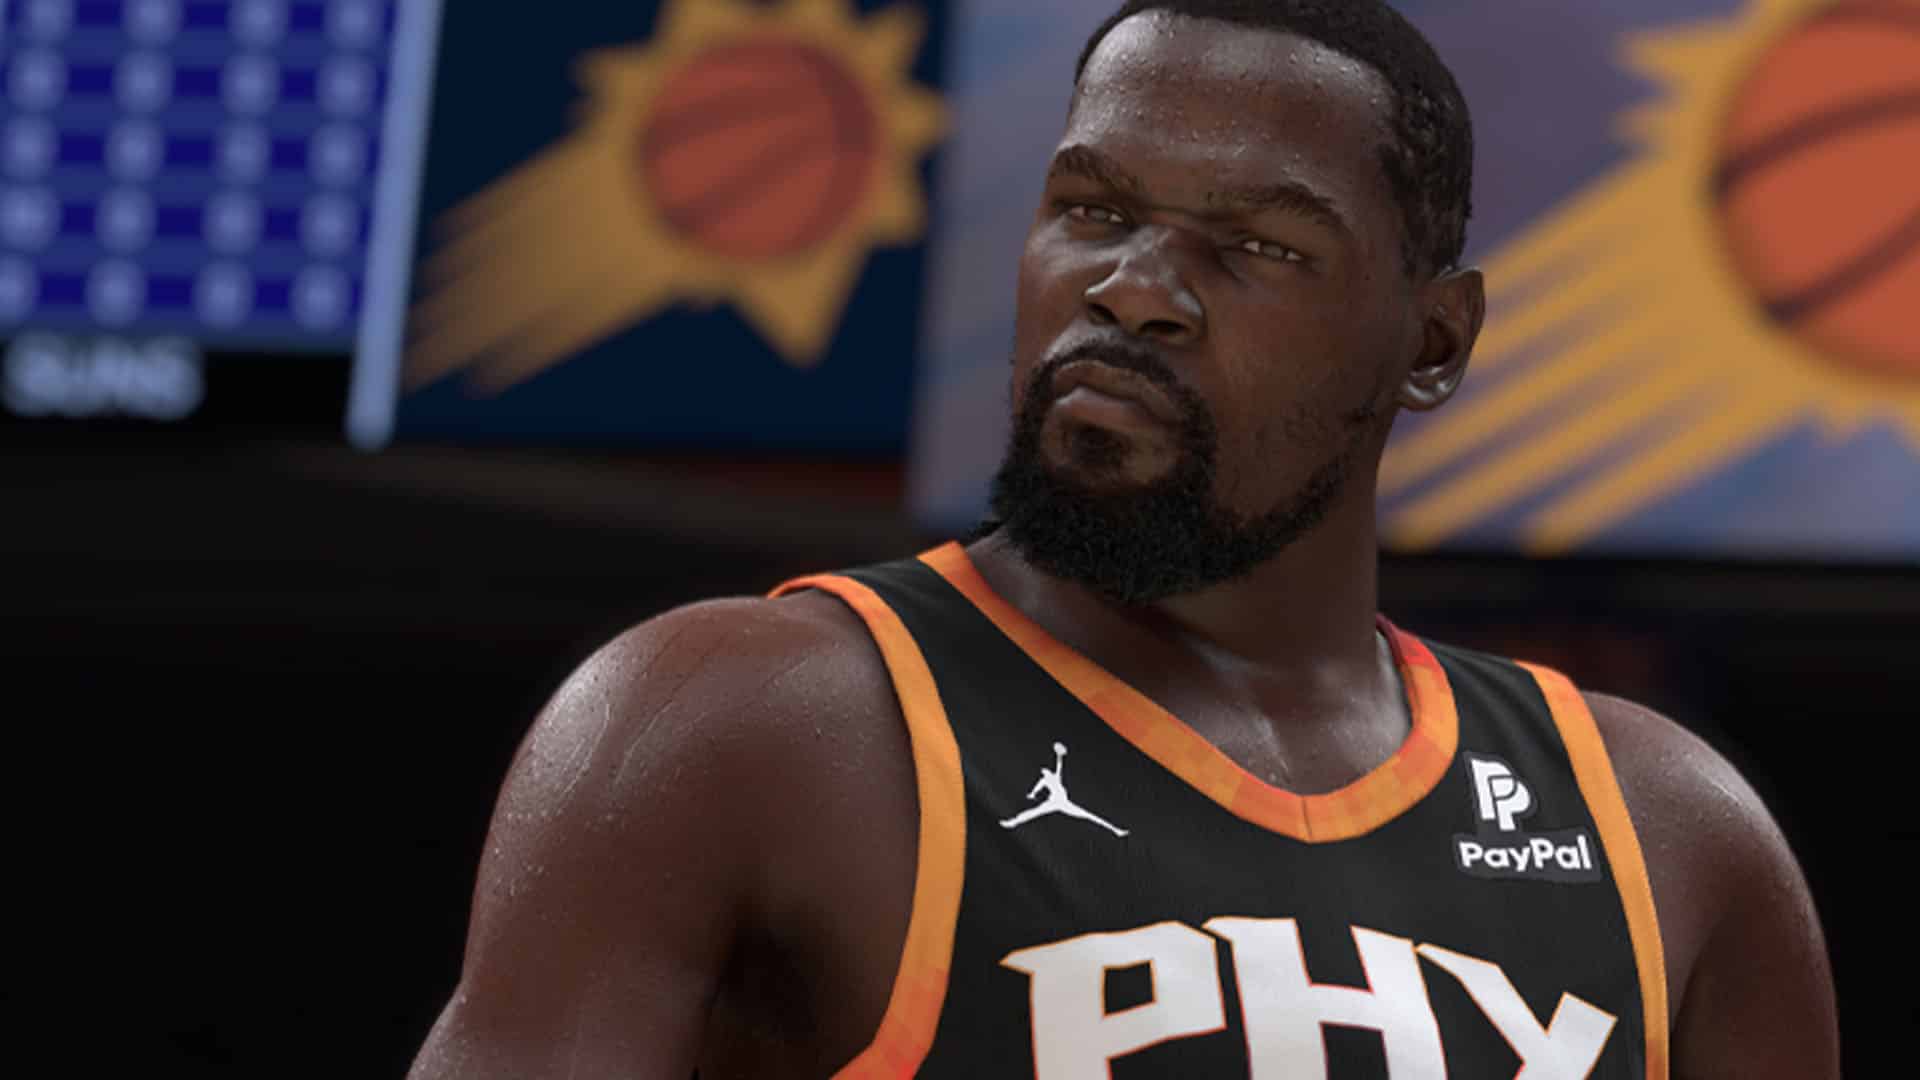 NBA 2K MyTEAM on X: City, Statement, and Classic jerseys added